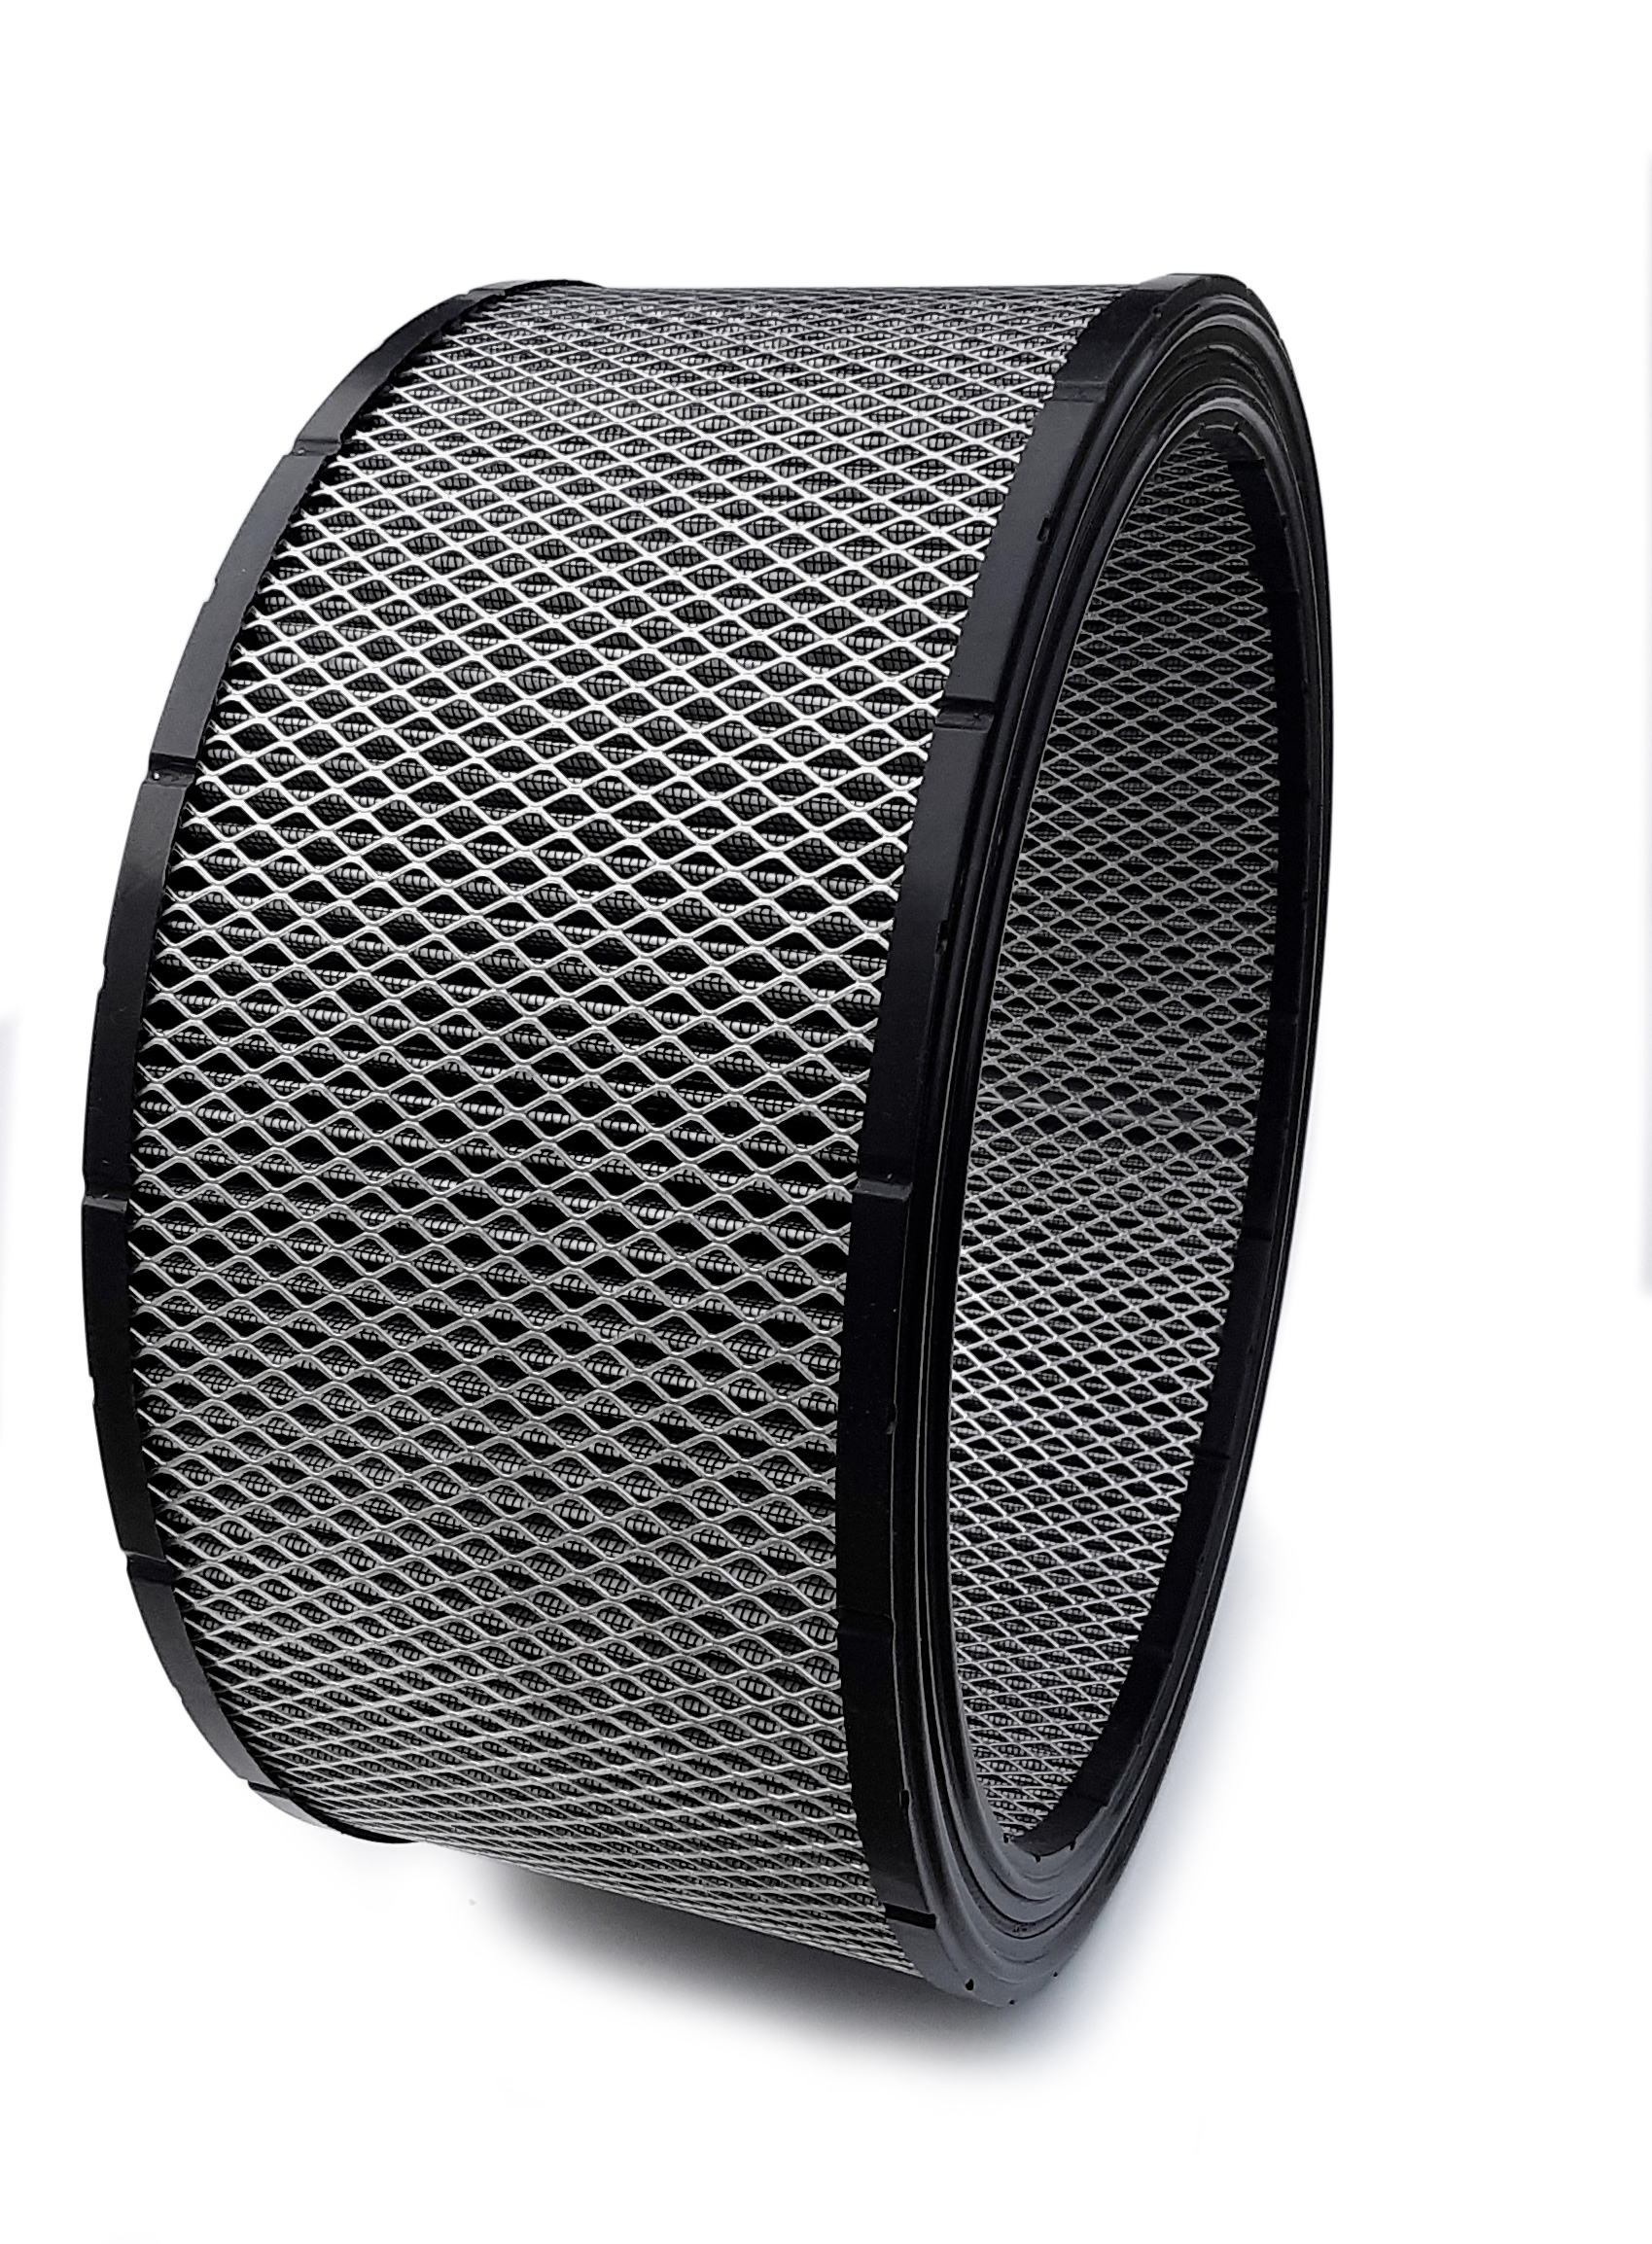 Spyder Filters SF1460 Air Filter Element, Dirt Racing / Off Road, 14 in Diameter, 6 in Tall, Reusable Cotton, Gray, Each